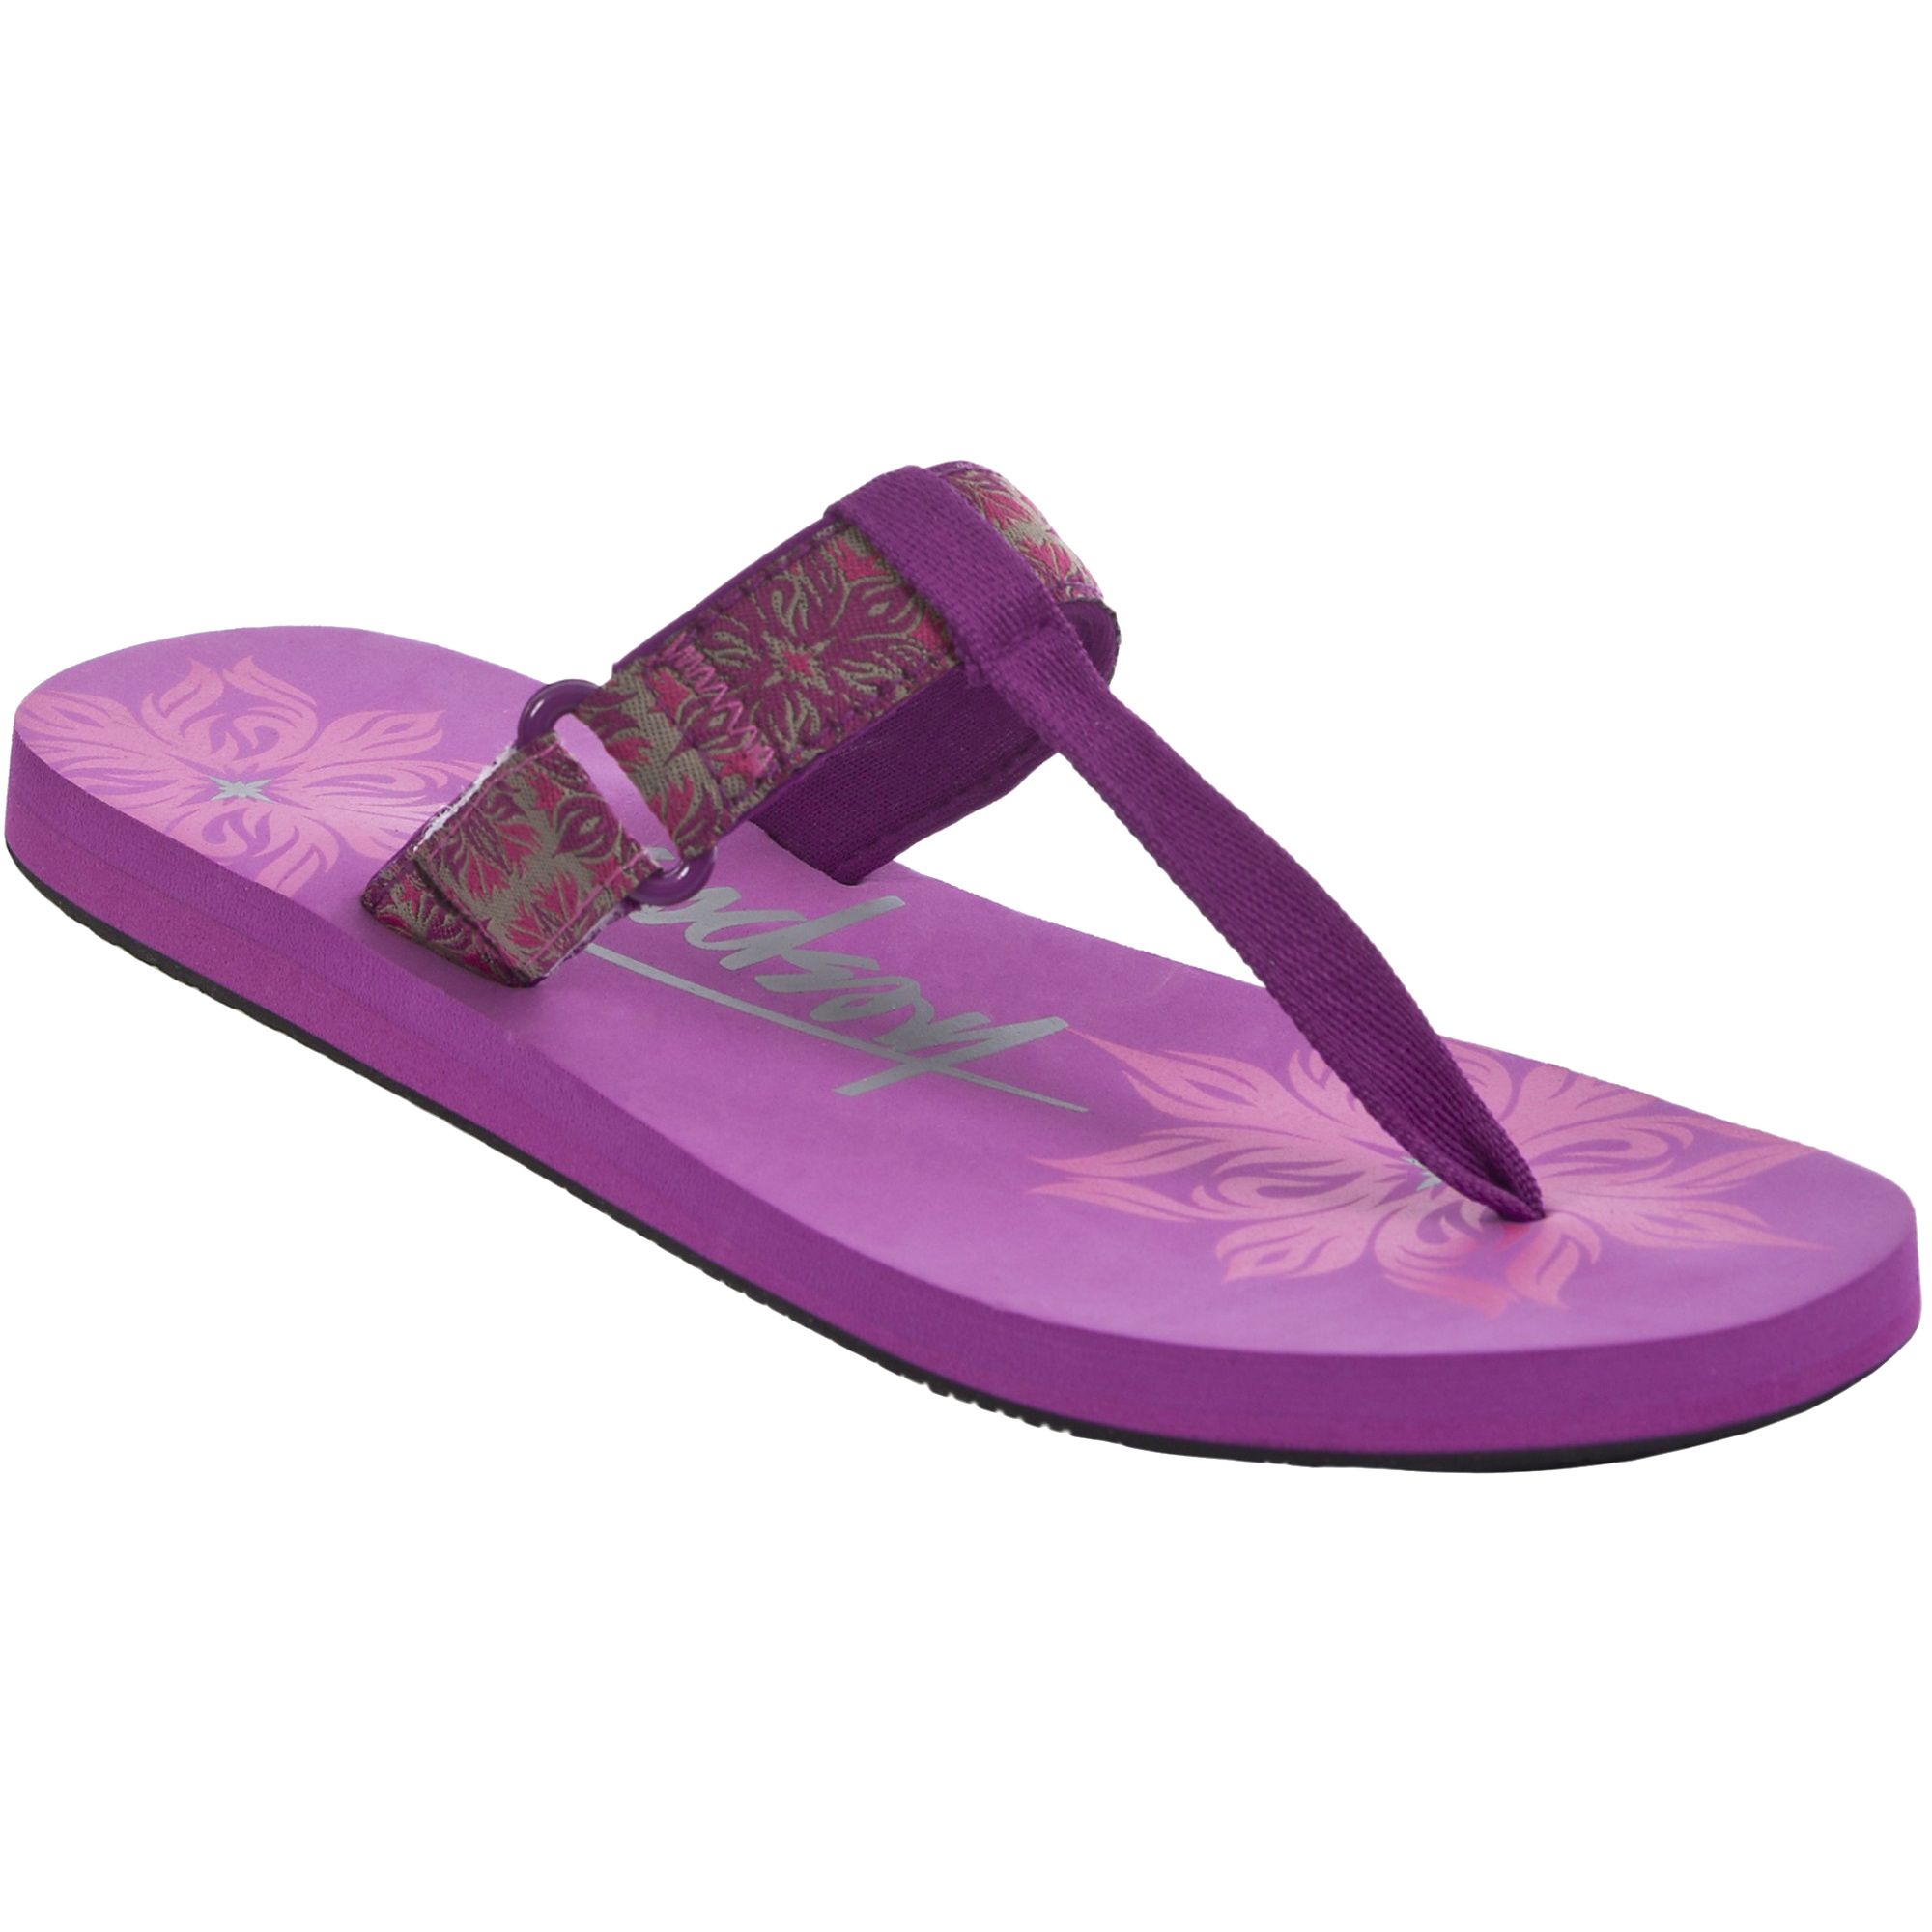 Womens lifestyle thong sandals. Webbing upper. Hook and loop instep strap. Cushioned EVA footbed with printed design. Upper: Textile, Midsole: Die Cut EVA, Outsole: Rubber.